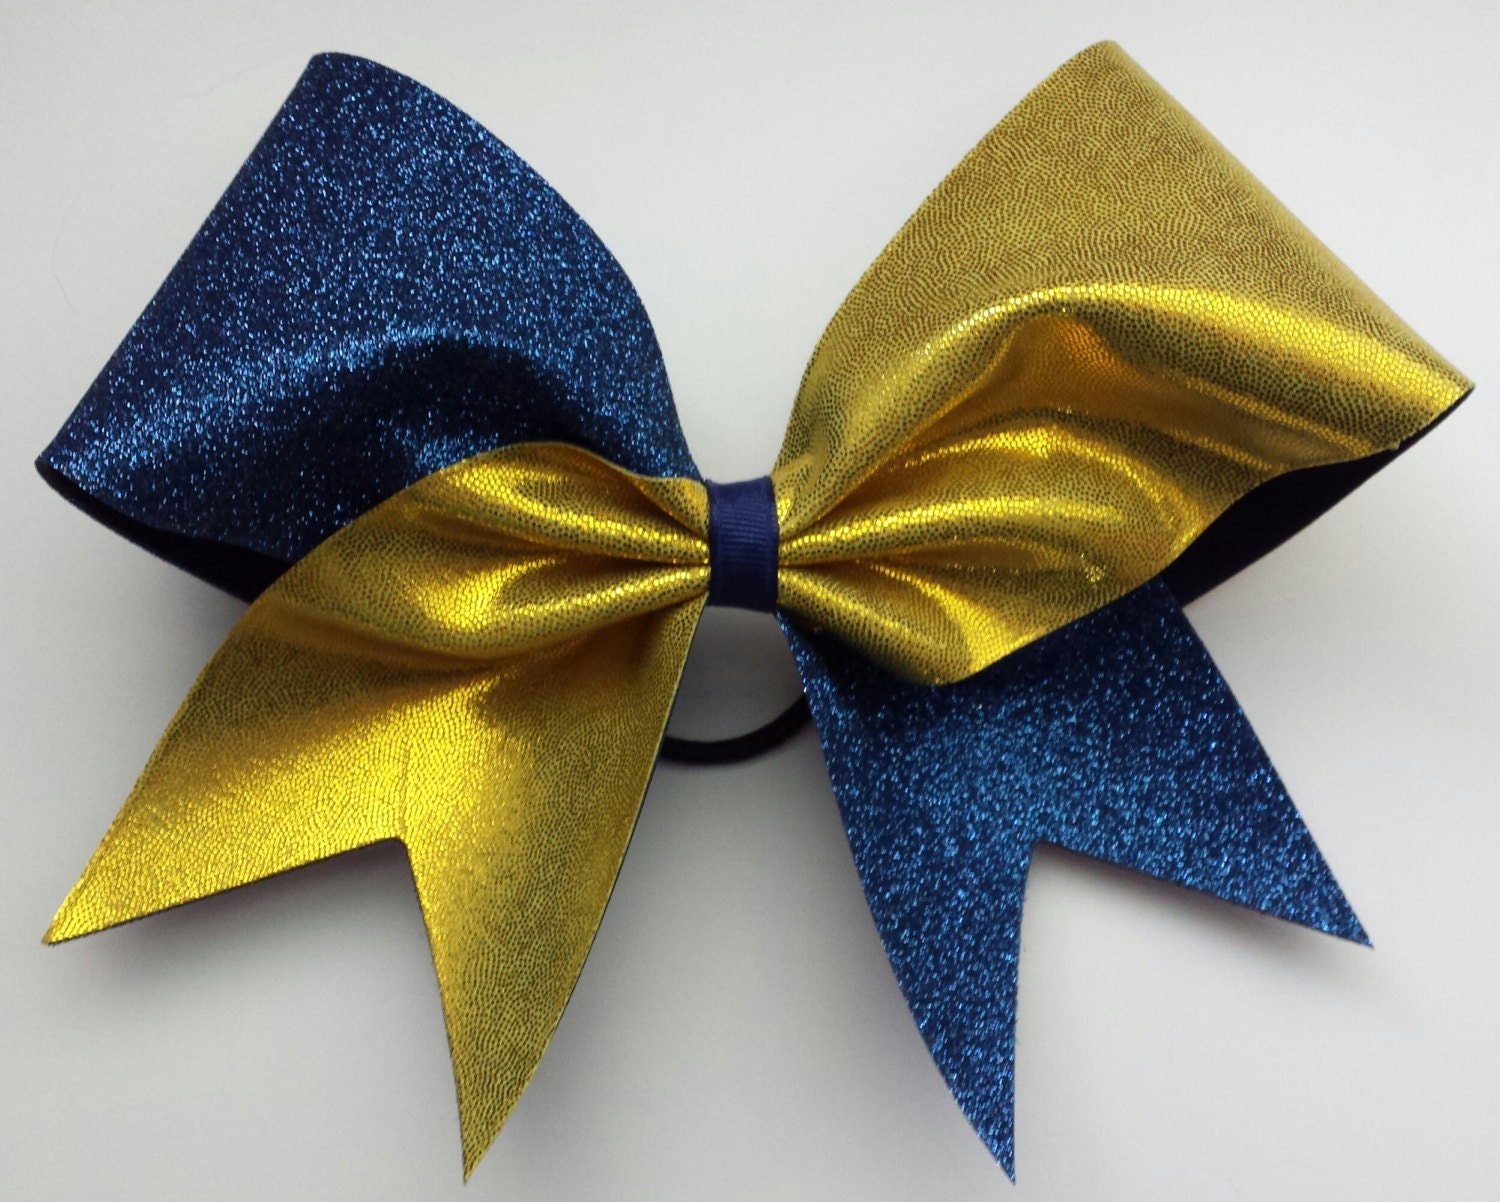 3. Navy Blue and Gold Cheer Bow - wide 3